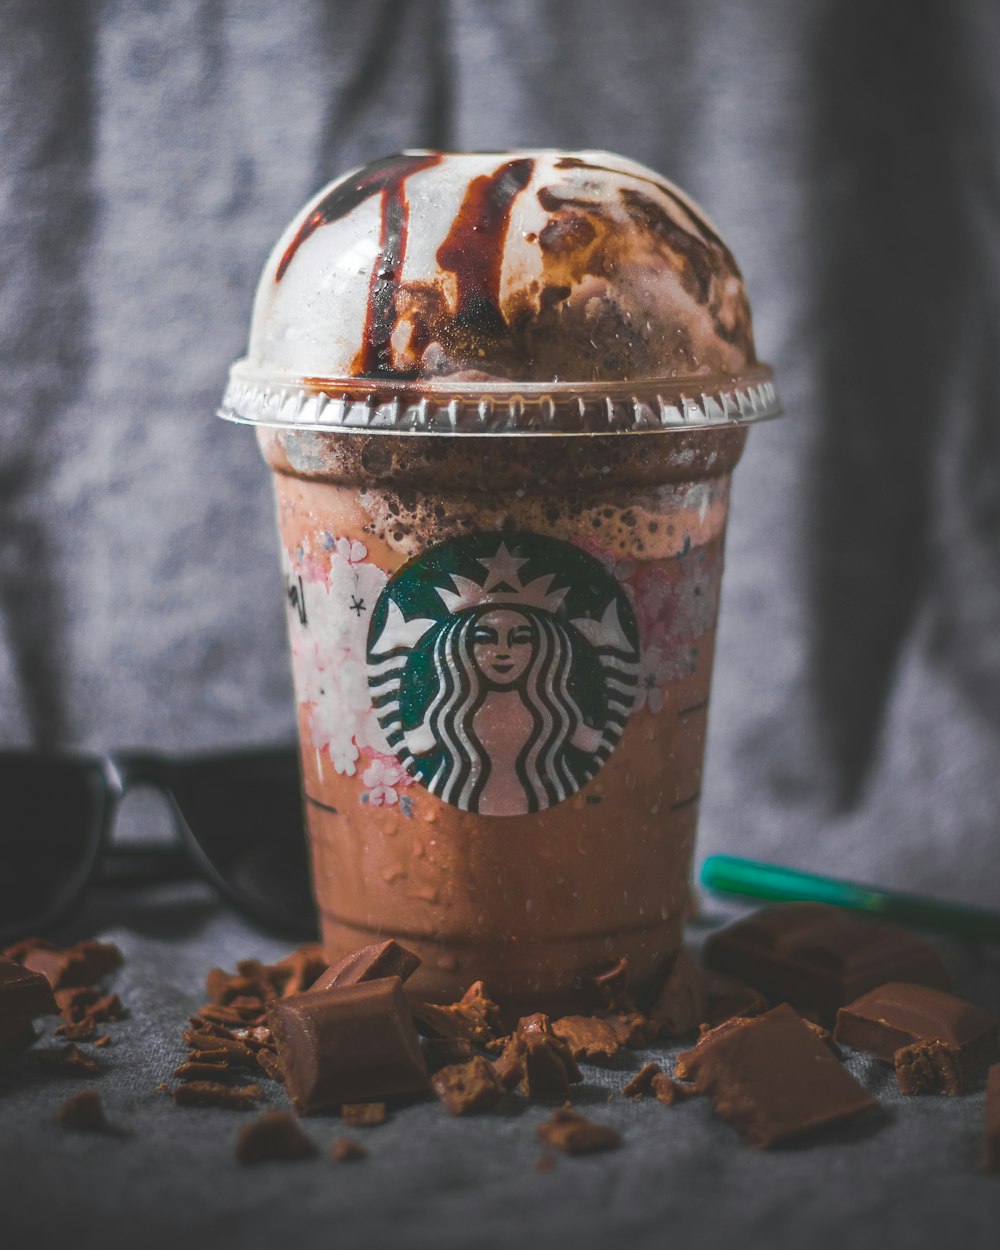 Starbucks cup with ice cream